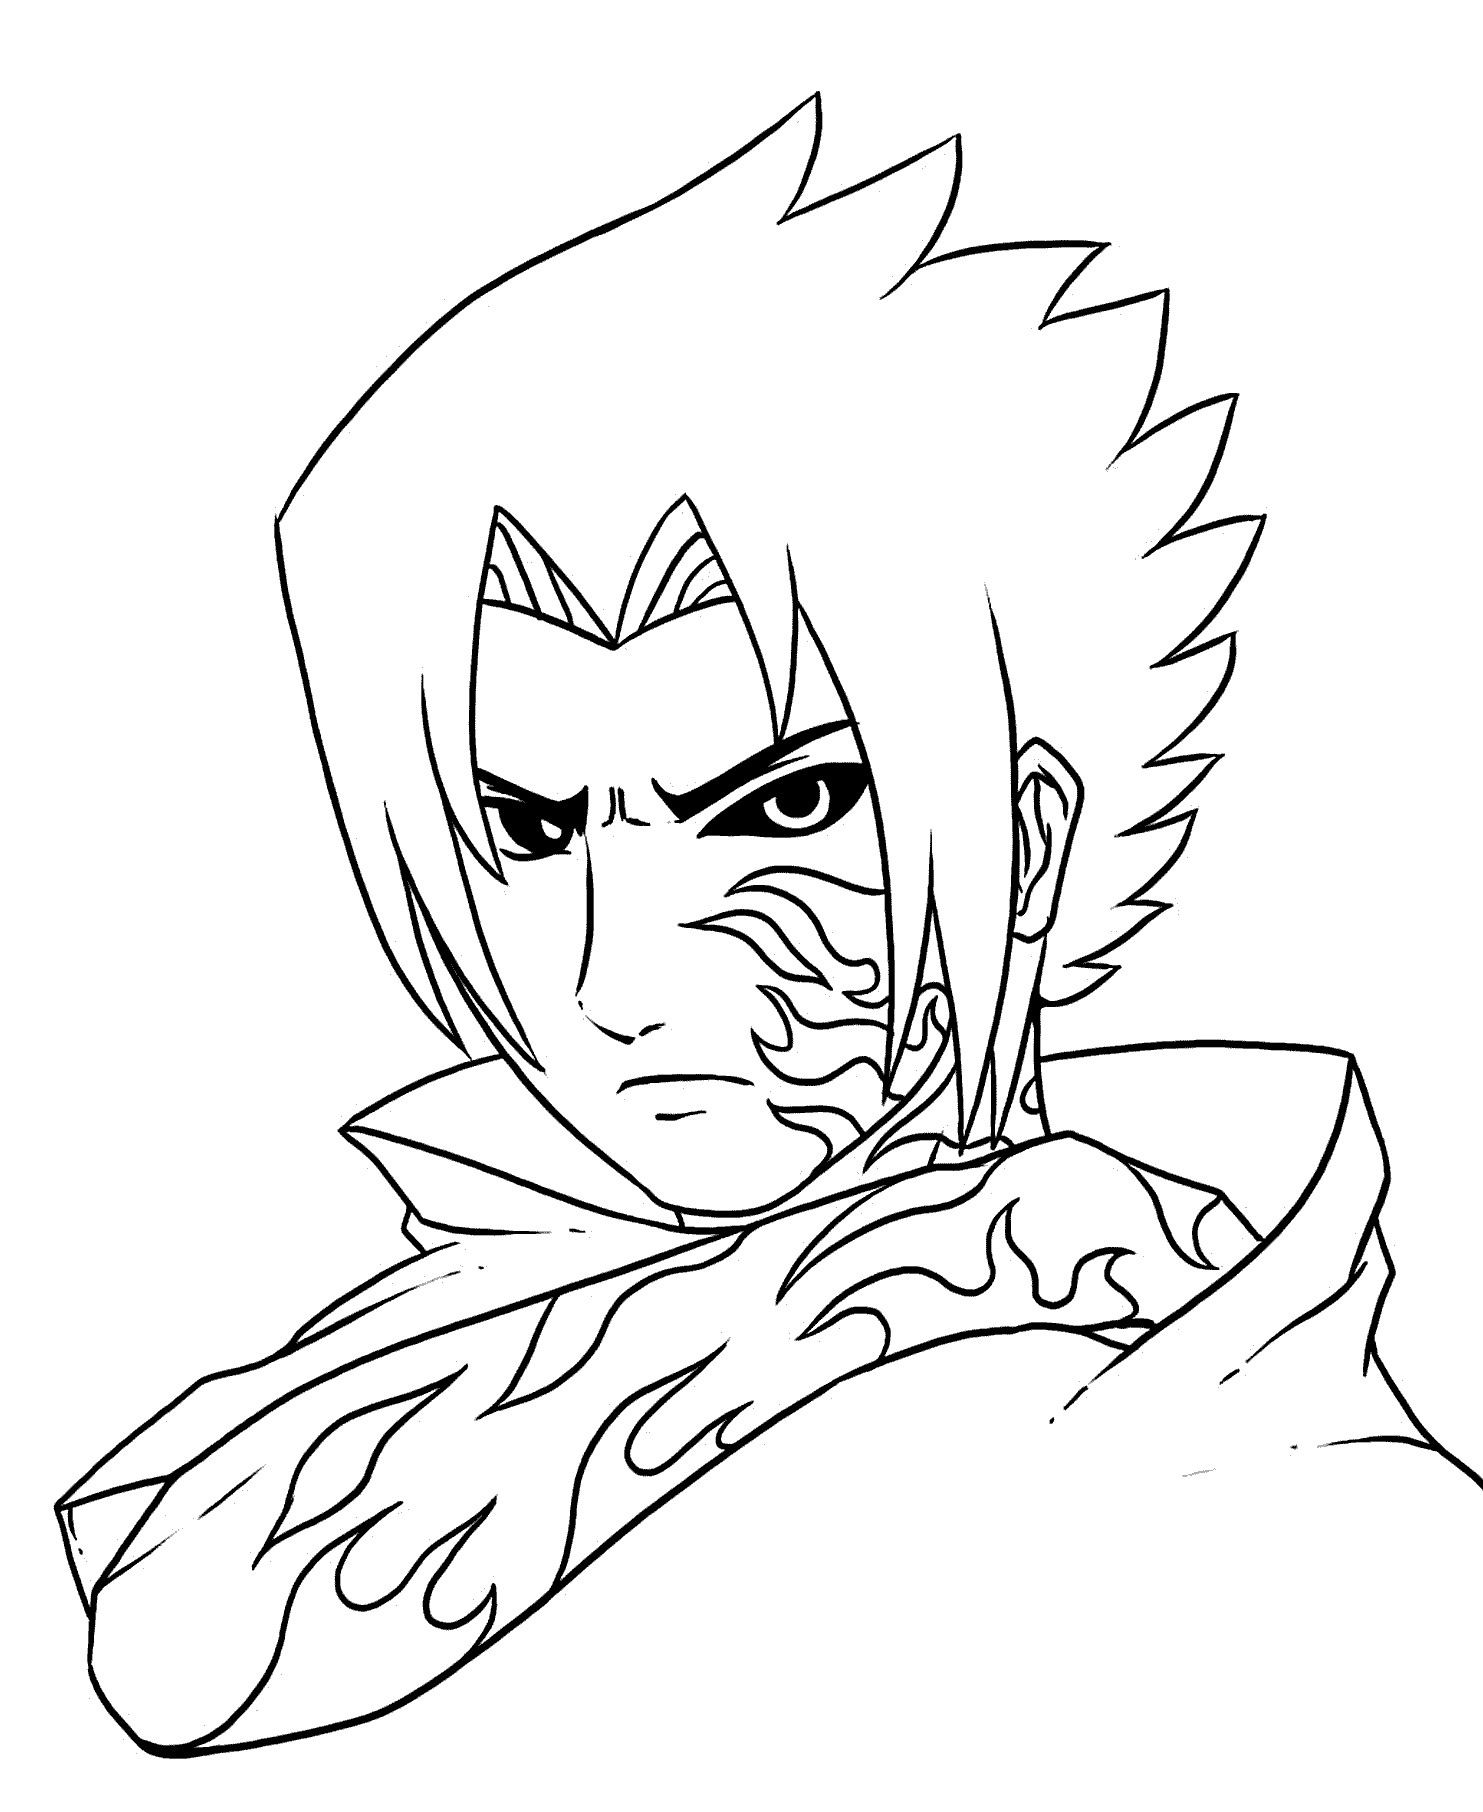 Download Naruto Coloring Pages Free Printable Coloring Pages For Kids